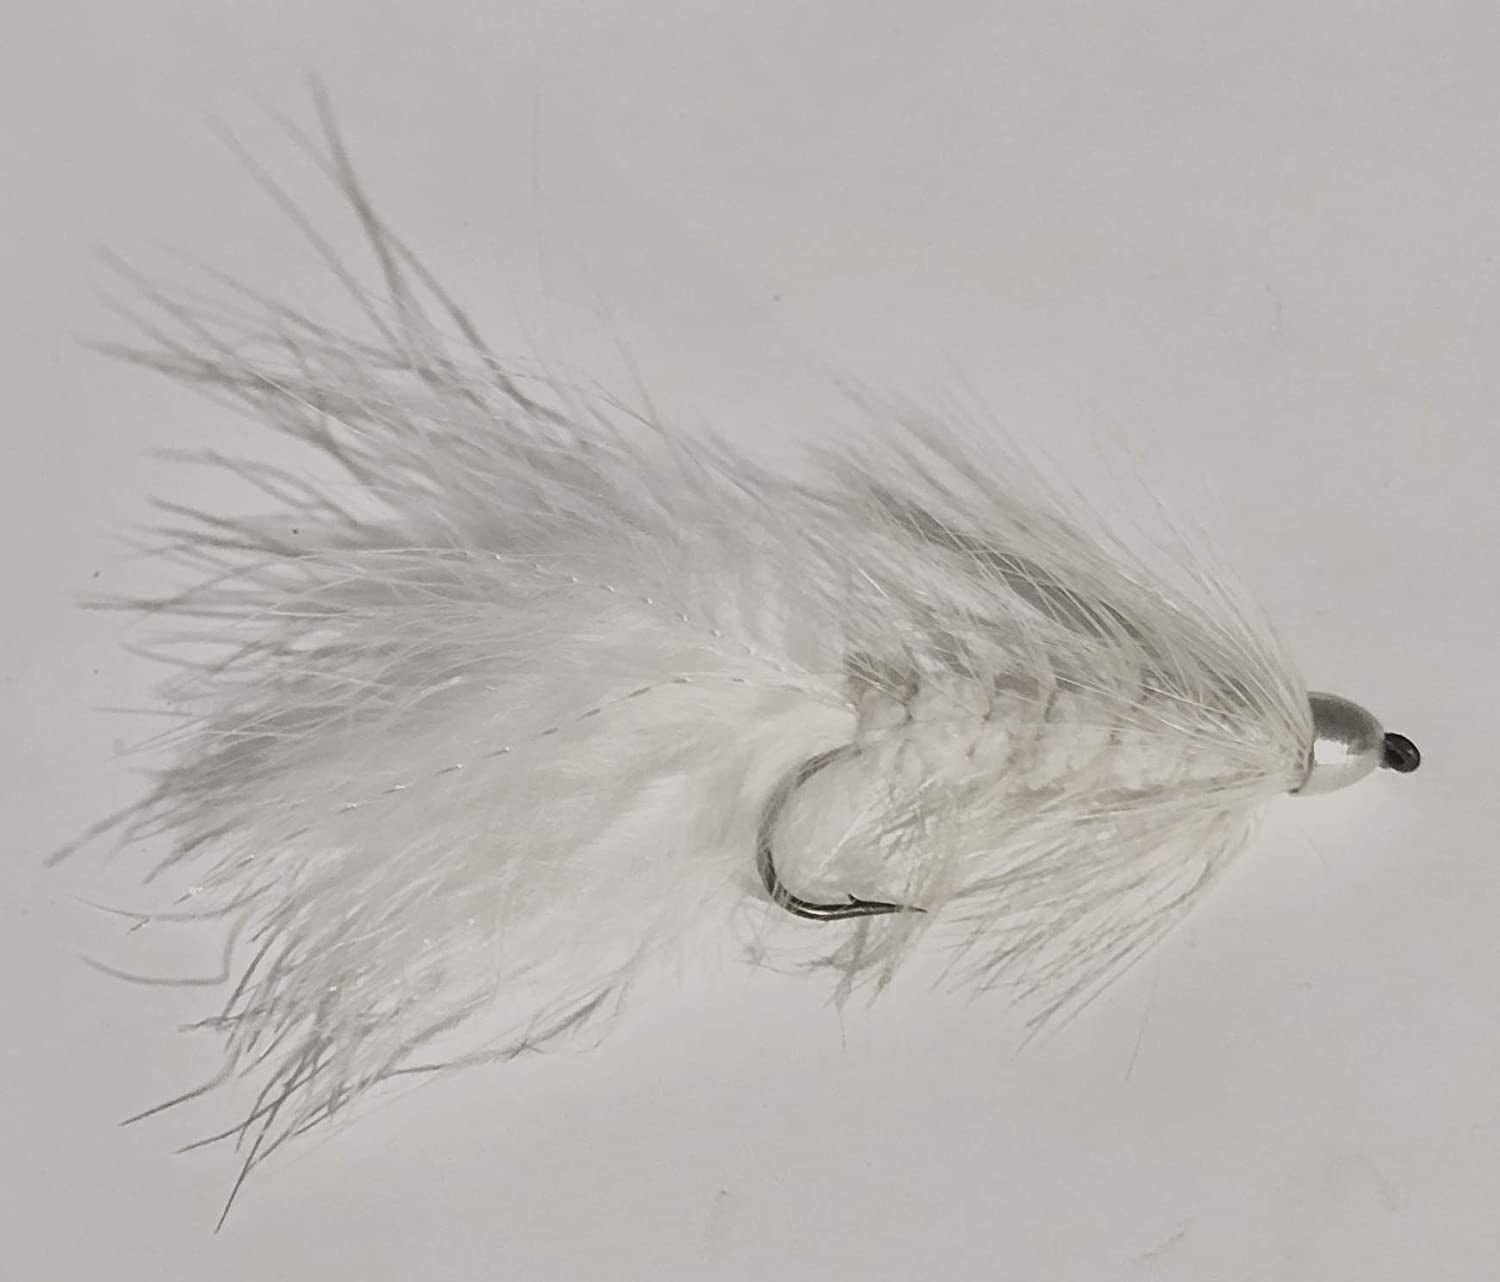 Feeder Creek Conehead Wooly Bugger Fly Fishing Wet Flies for Trout, Bass,  Salmon and Other Freshwater Fish, One Dozen Streamer Flies, Different Sizes  & Colors Available 